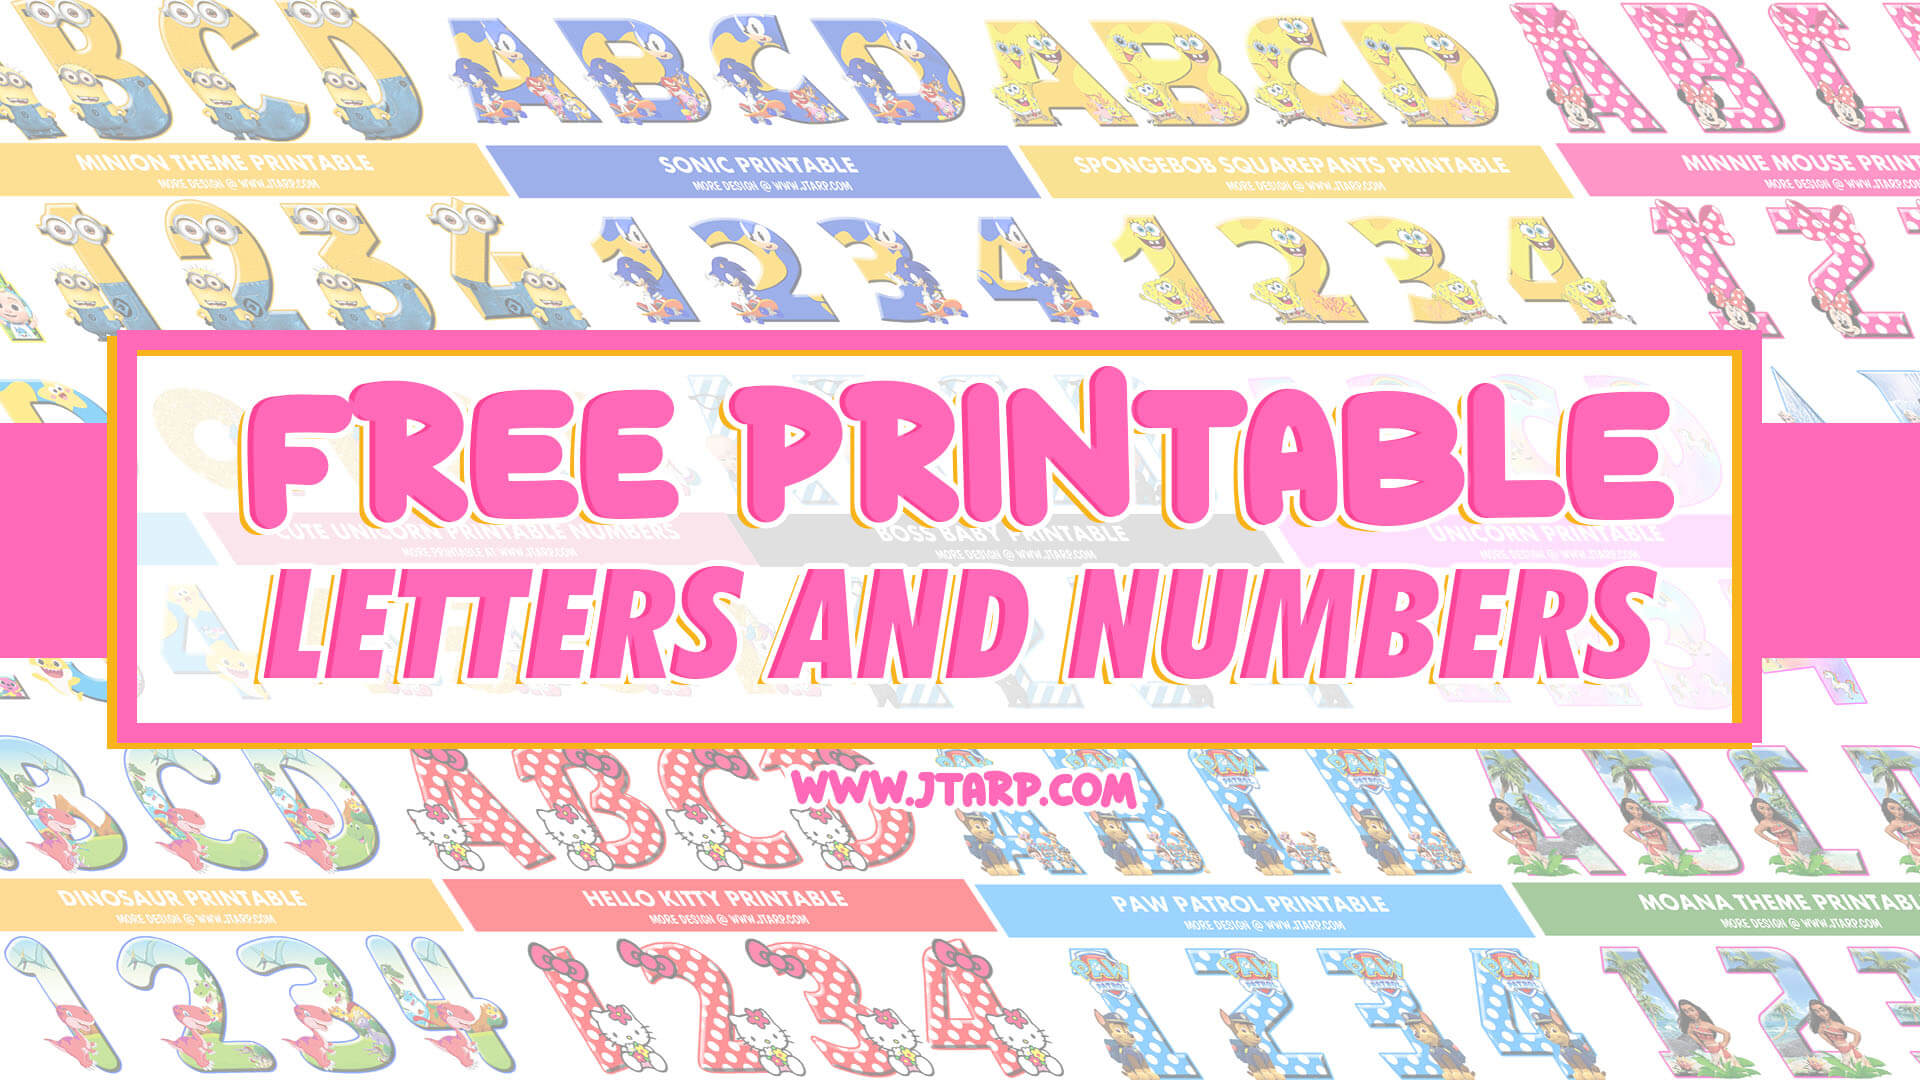 Free Printable Alphabets Letters and Numbers Compilation Thumbnail